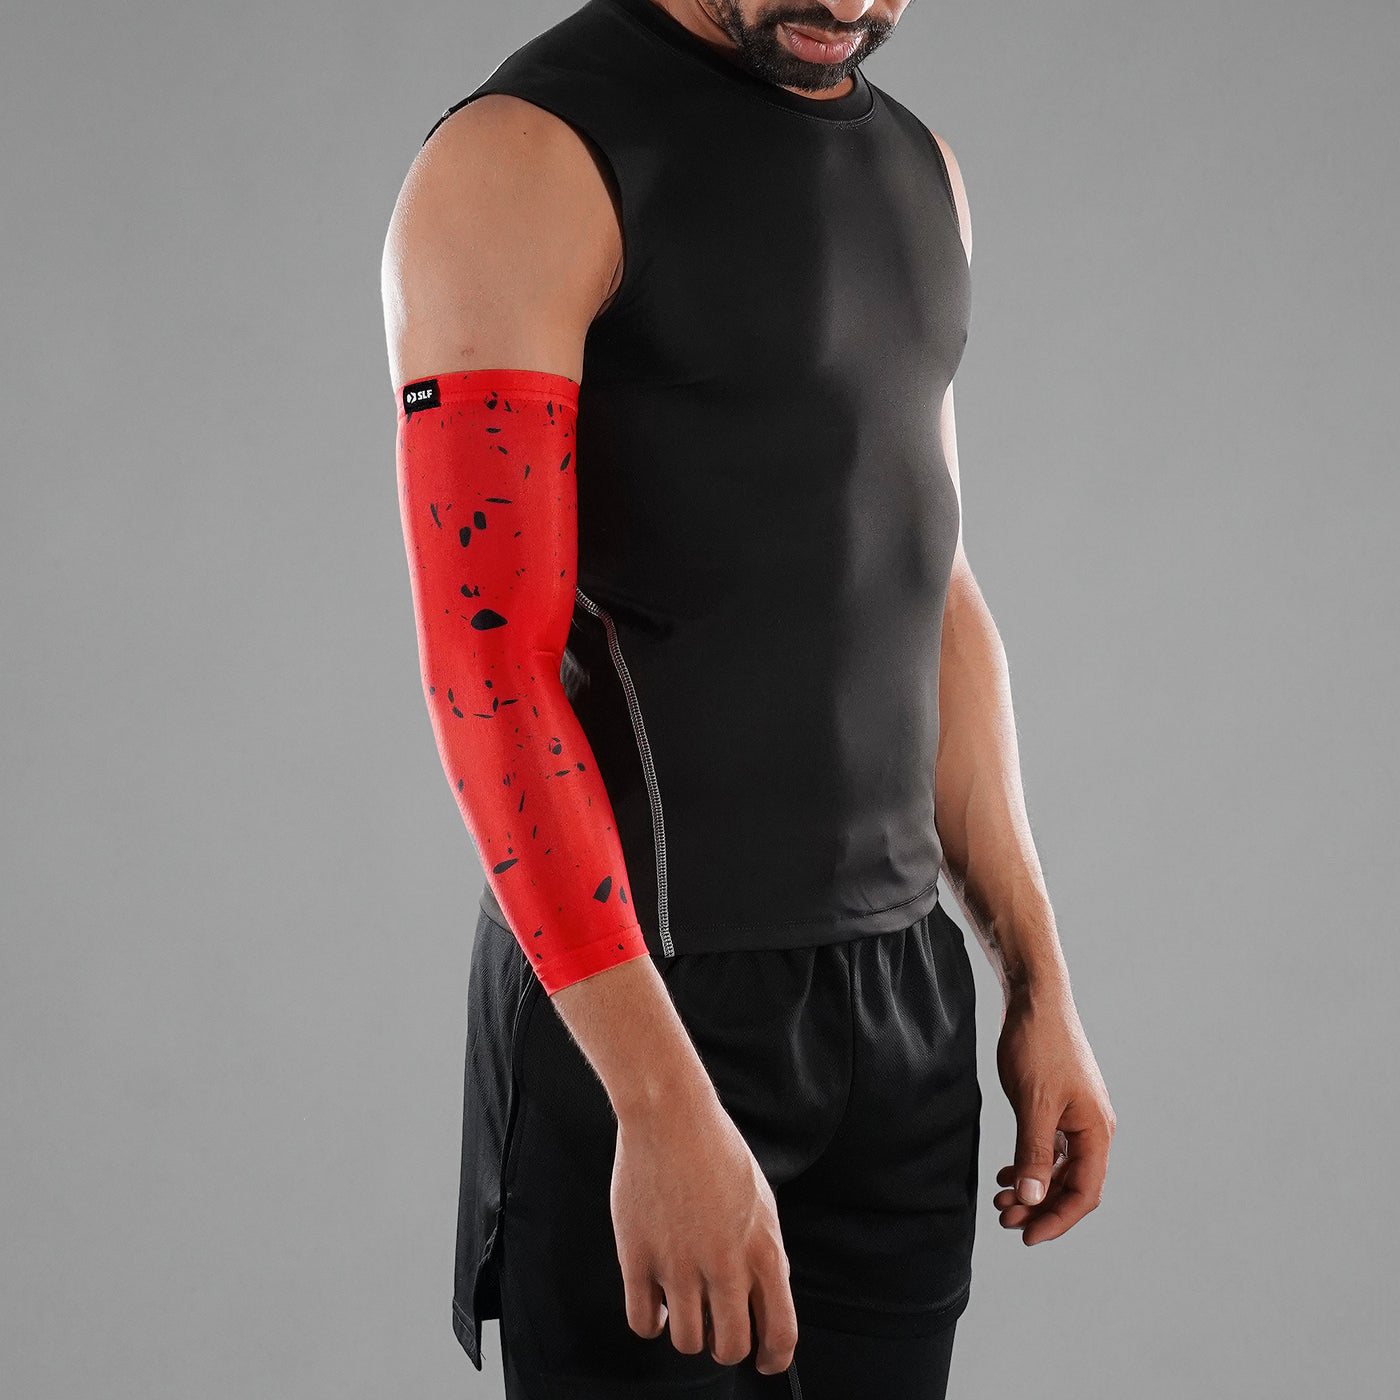 Concrete Red 3/4 Arm Sleeve